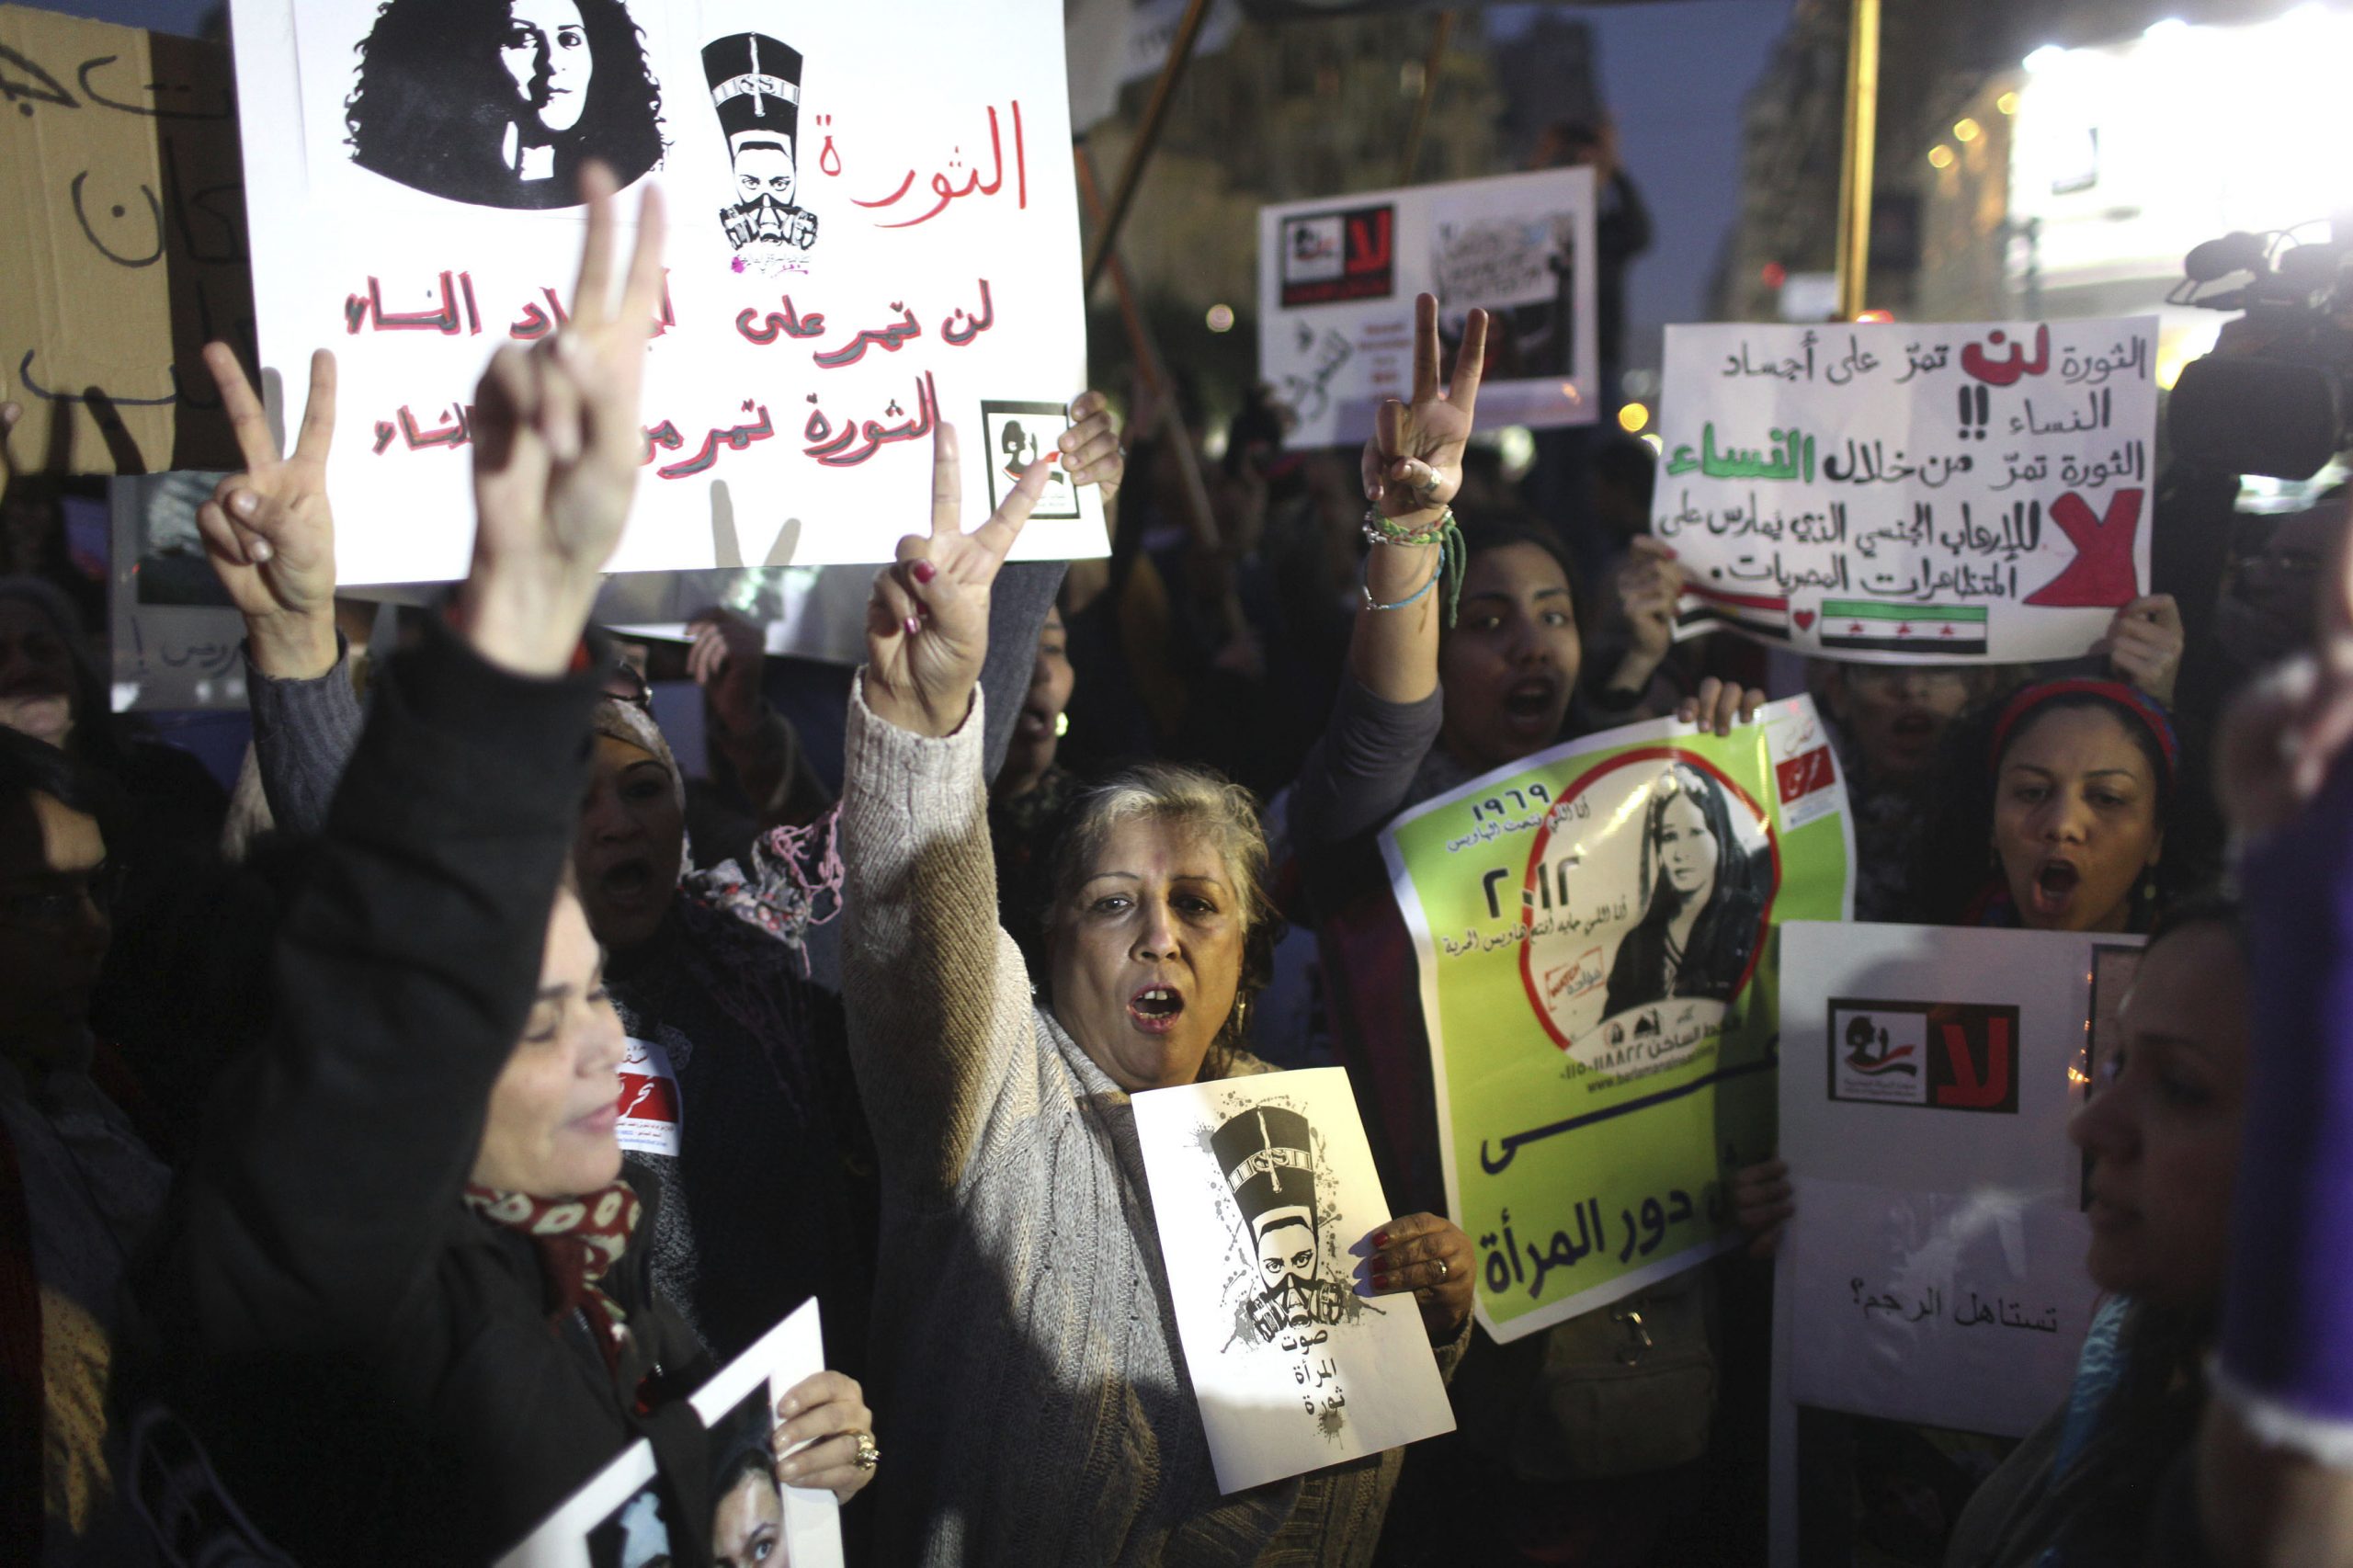 Women chant slogans as they participate in a protest against sexual harassment, central Cairo, 12 February 2013. Reuters/Asmaa Waguih.